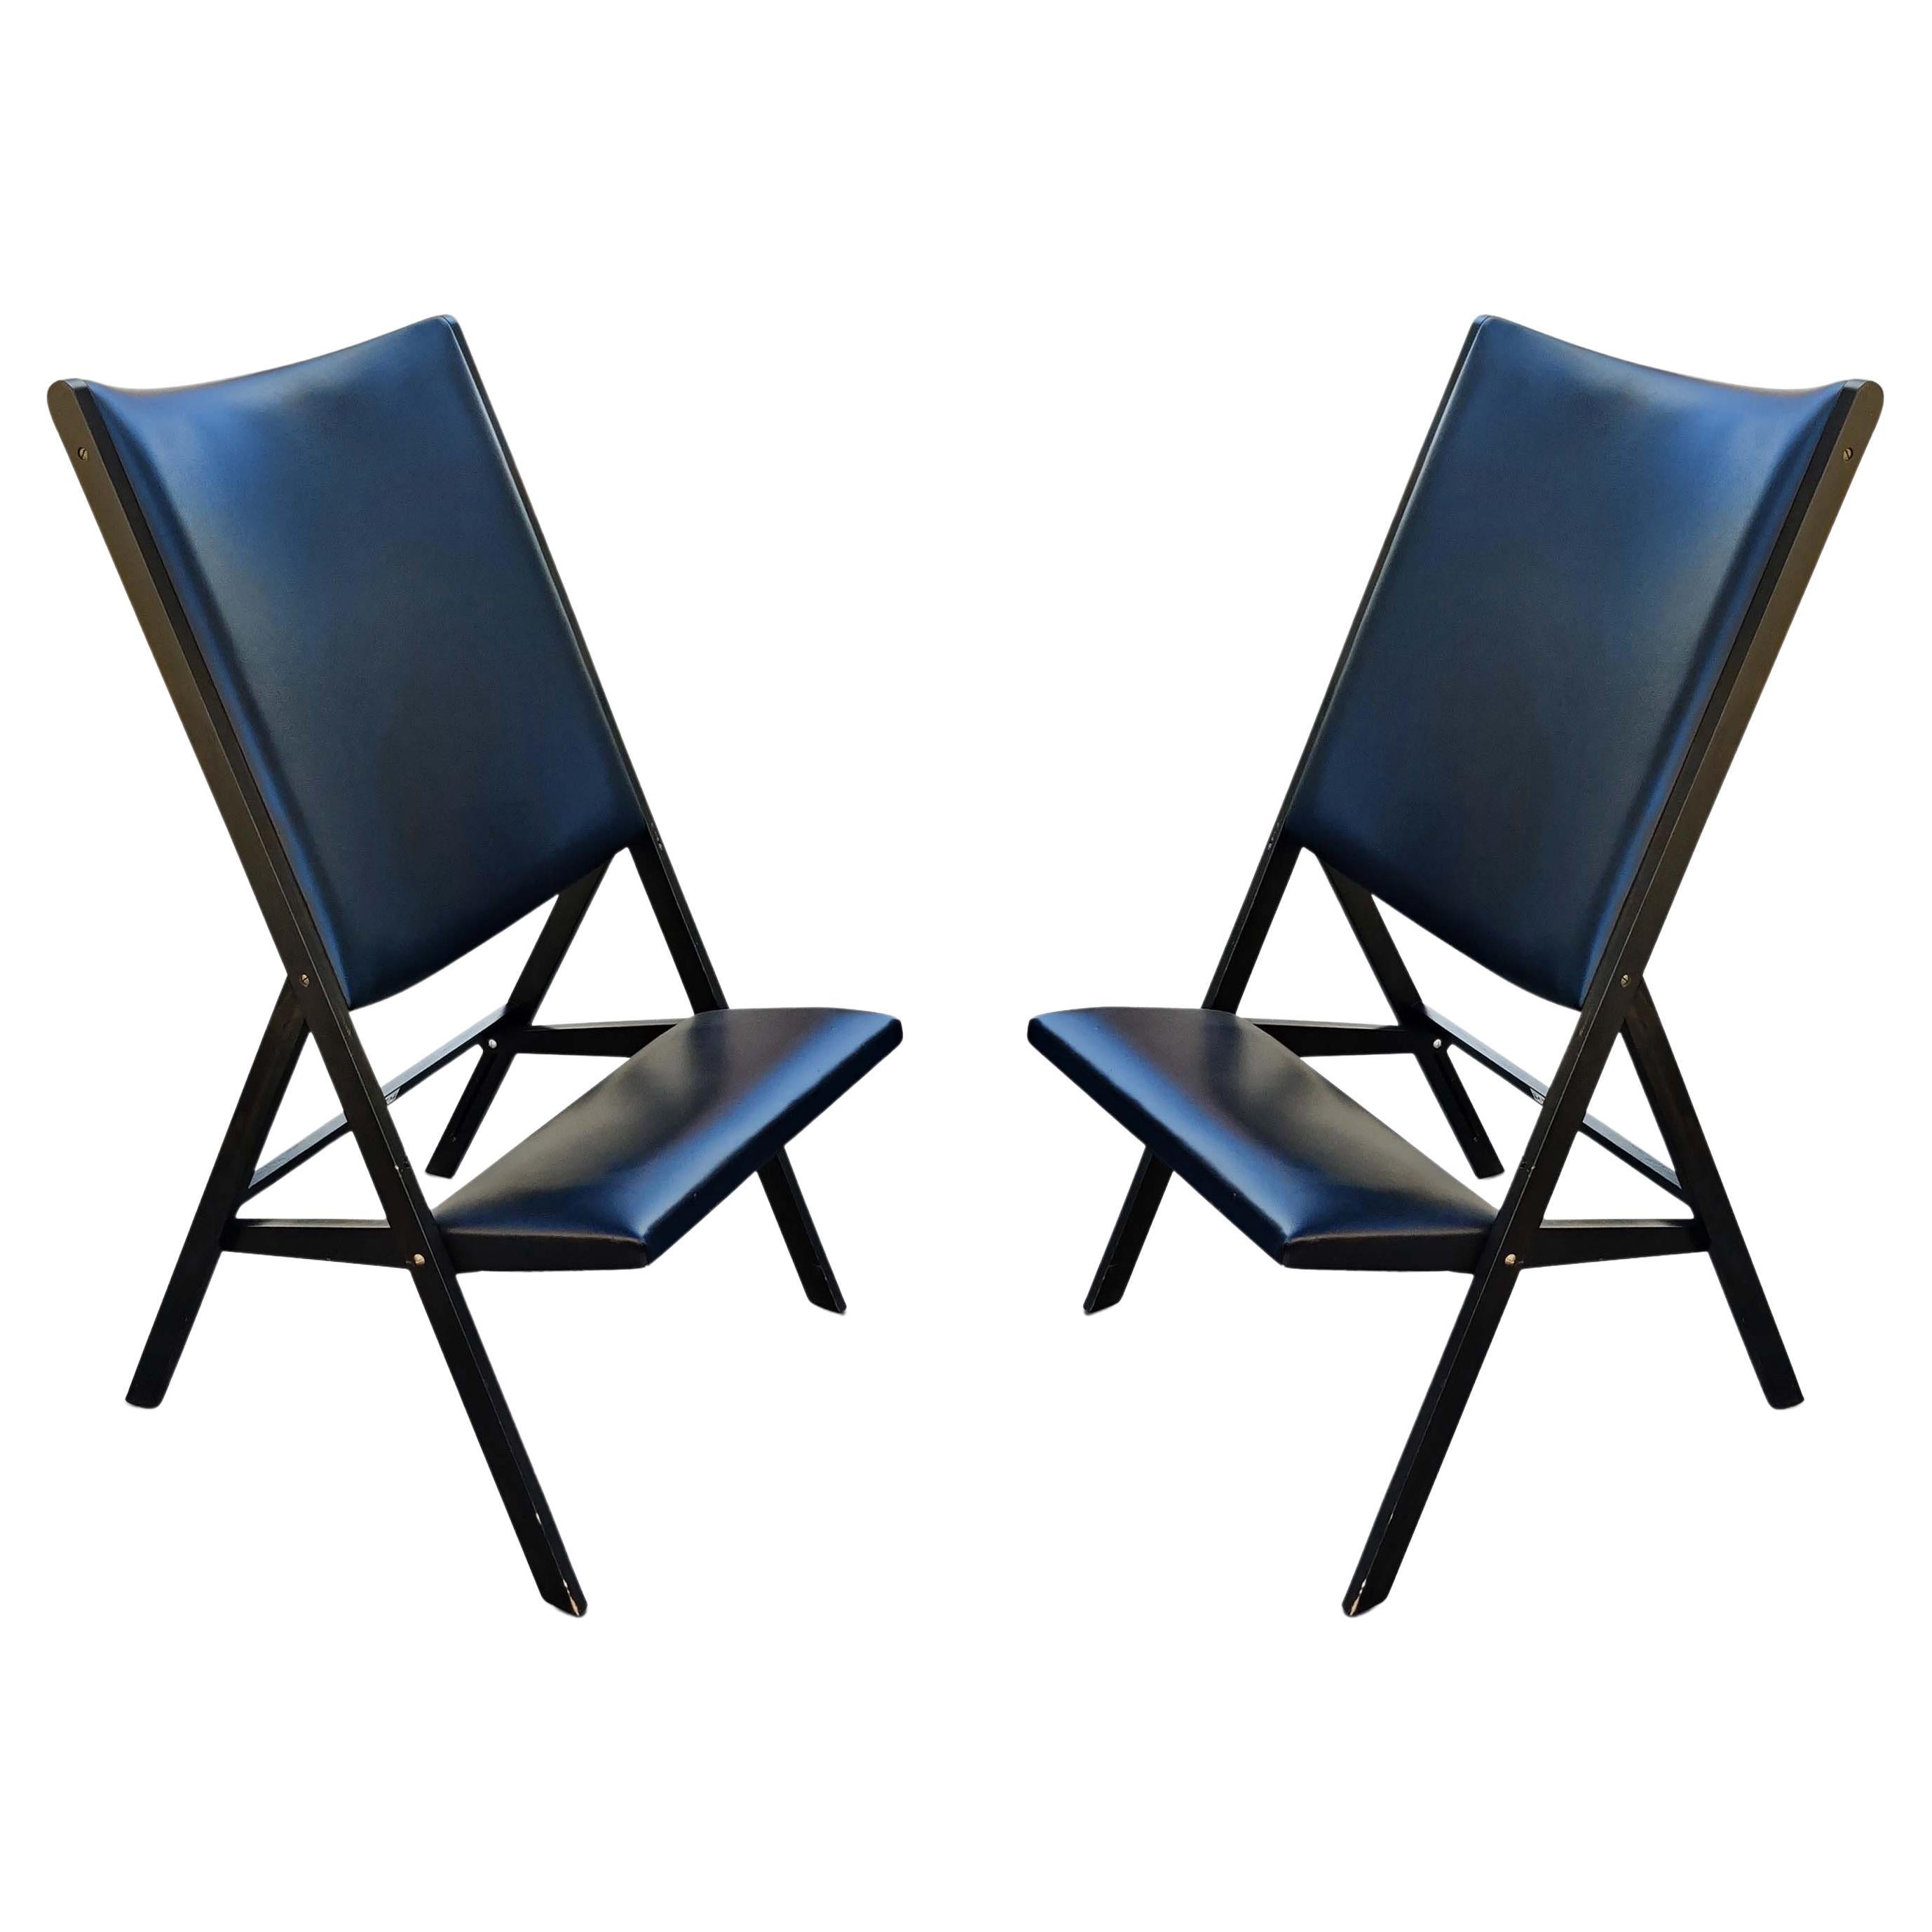 Pair of Gio Ponti for Walter Ponti Gabriella Folding Chairs Model D.270.2 Black For Sale